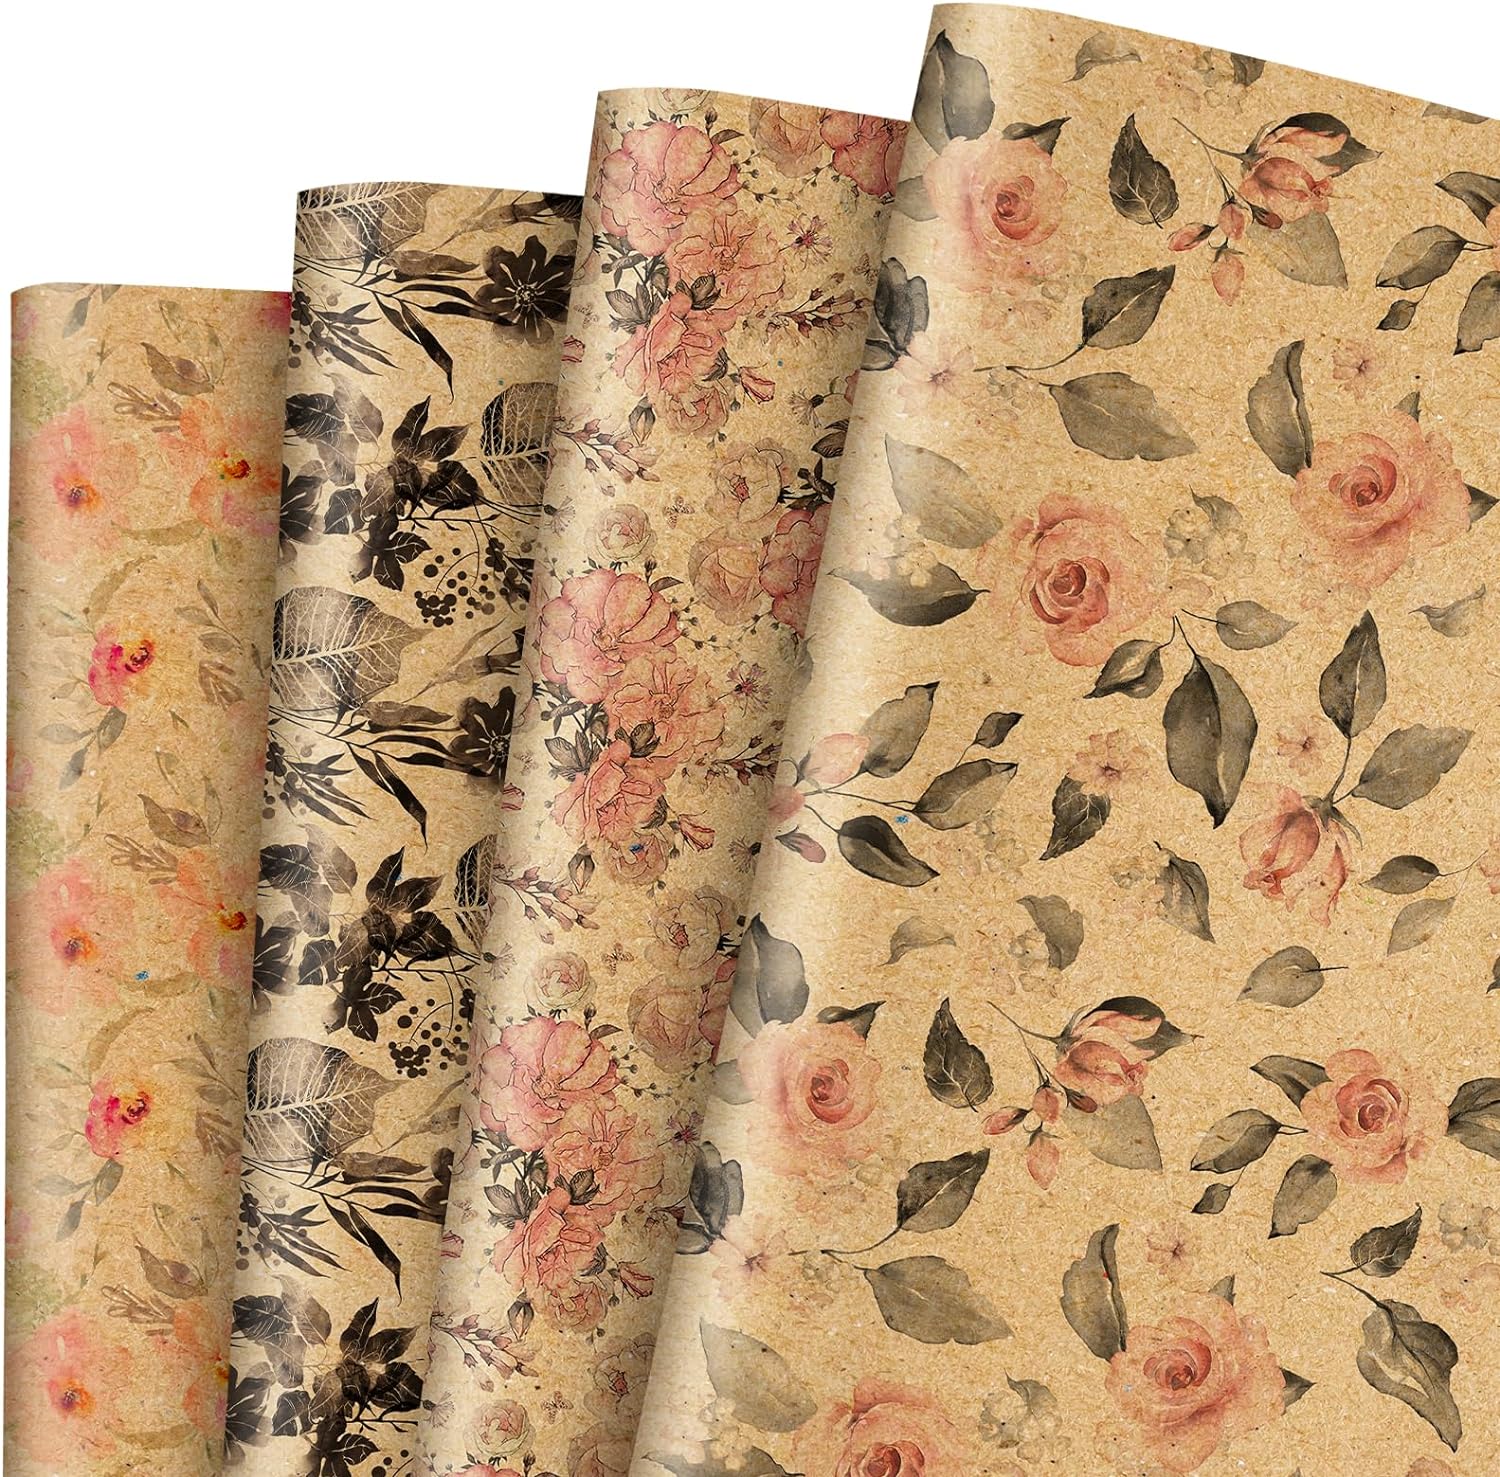 Whaline 12 Sheet Retro Floral Wrapping Paper Vintage Flower Kraft Gift Wrap Paper Bulk Decorative Art Paper for Birthday Baby Shower Wedding DIY Crafts Gift Packing, 19.7 x 27.6 Inch, Folded Flat